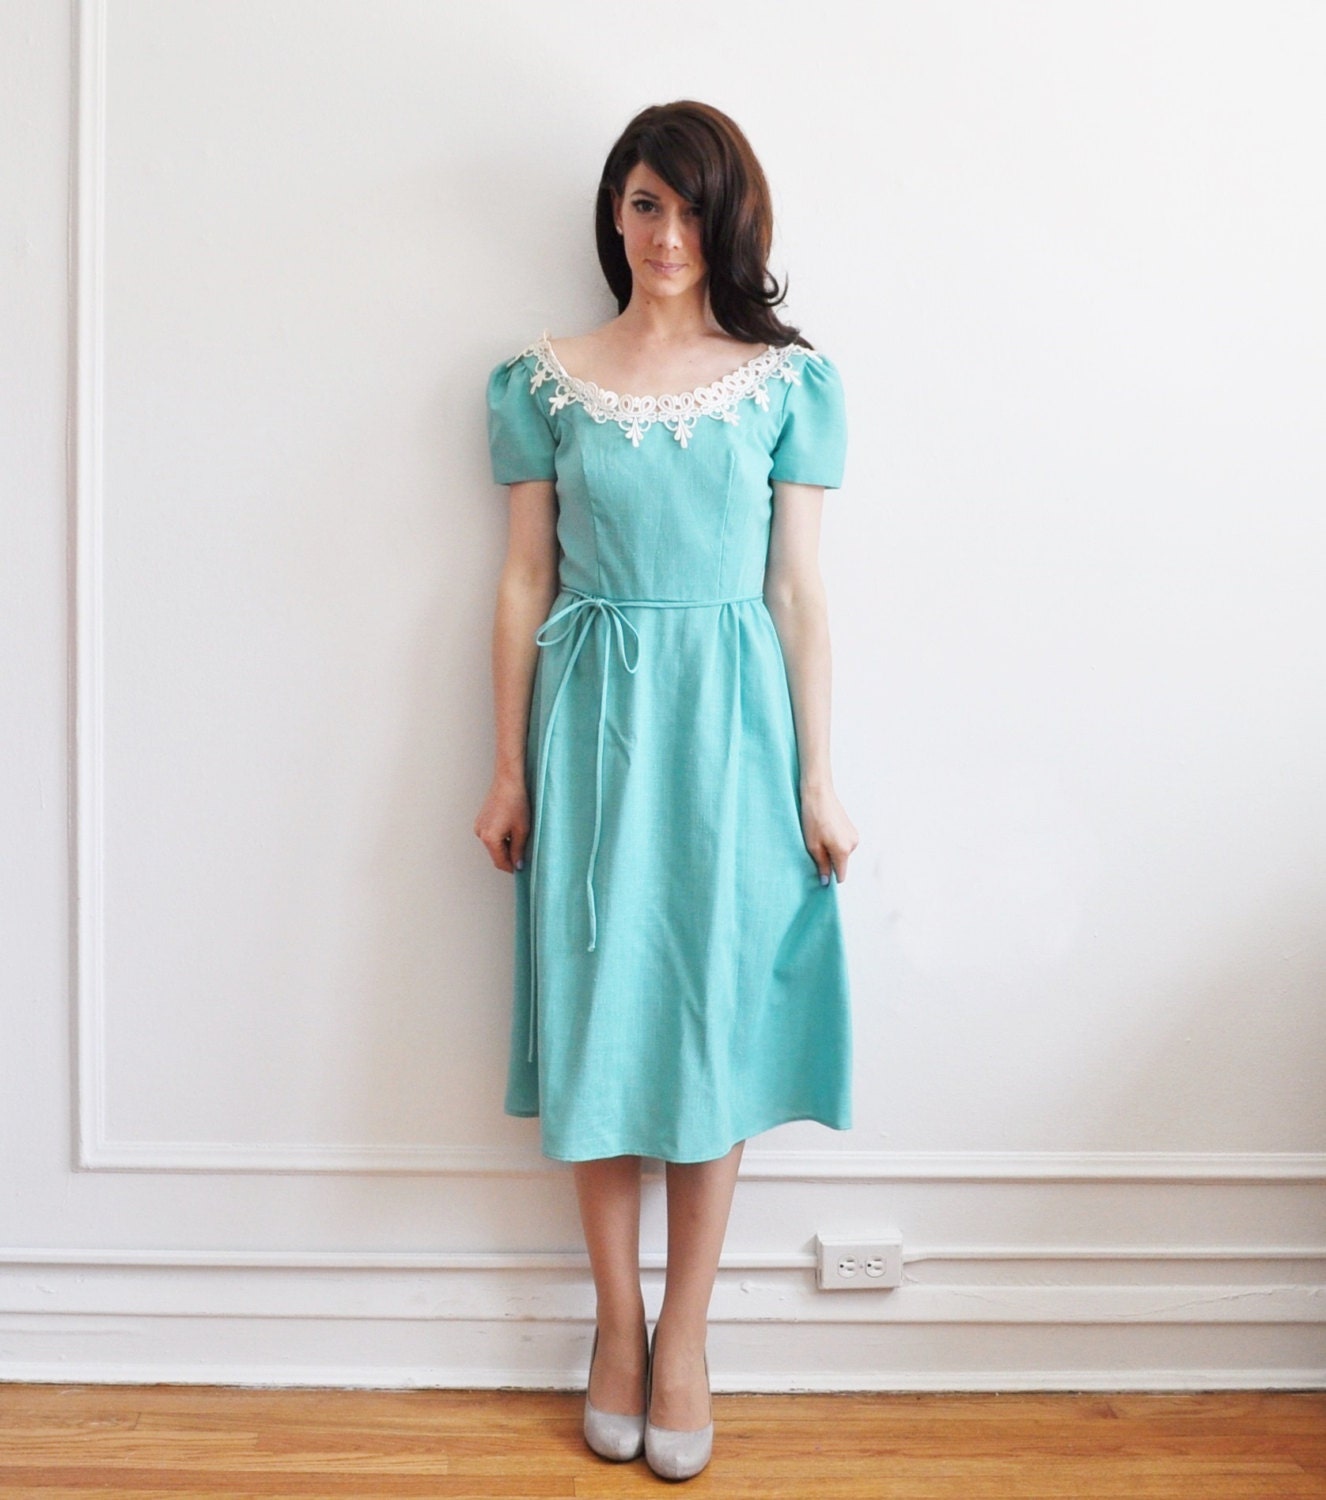 blue green day dress . crocheted lace collar .small - DOTTO